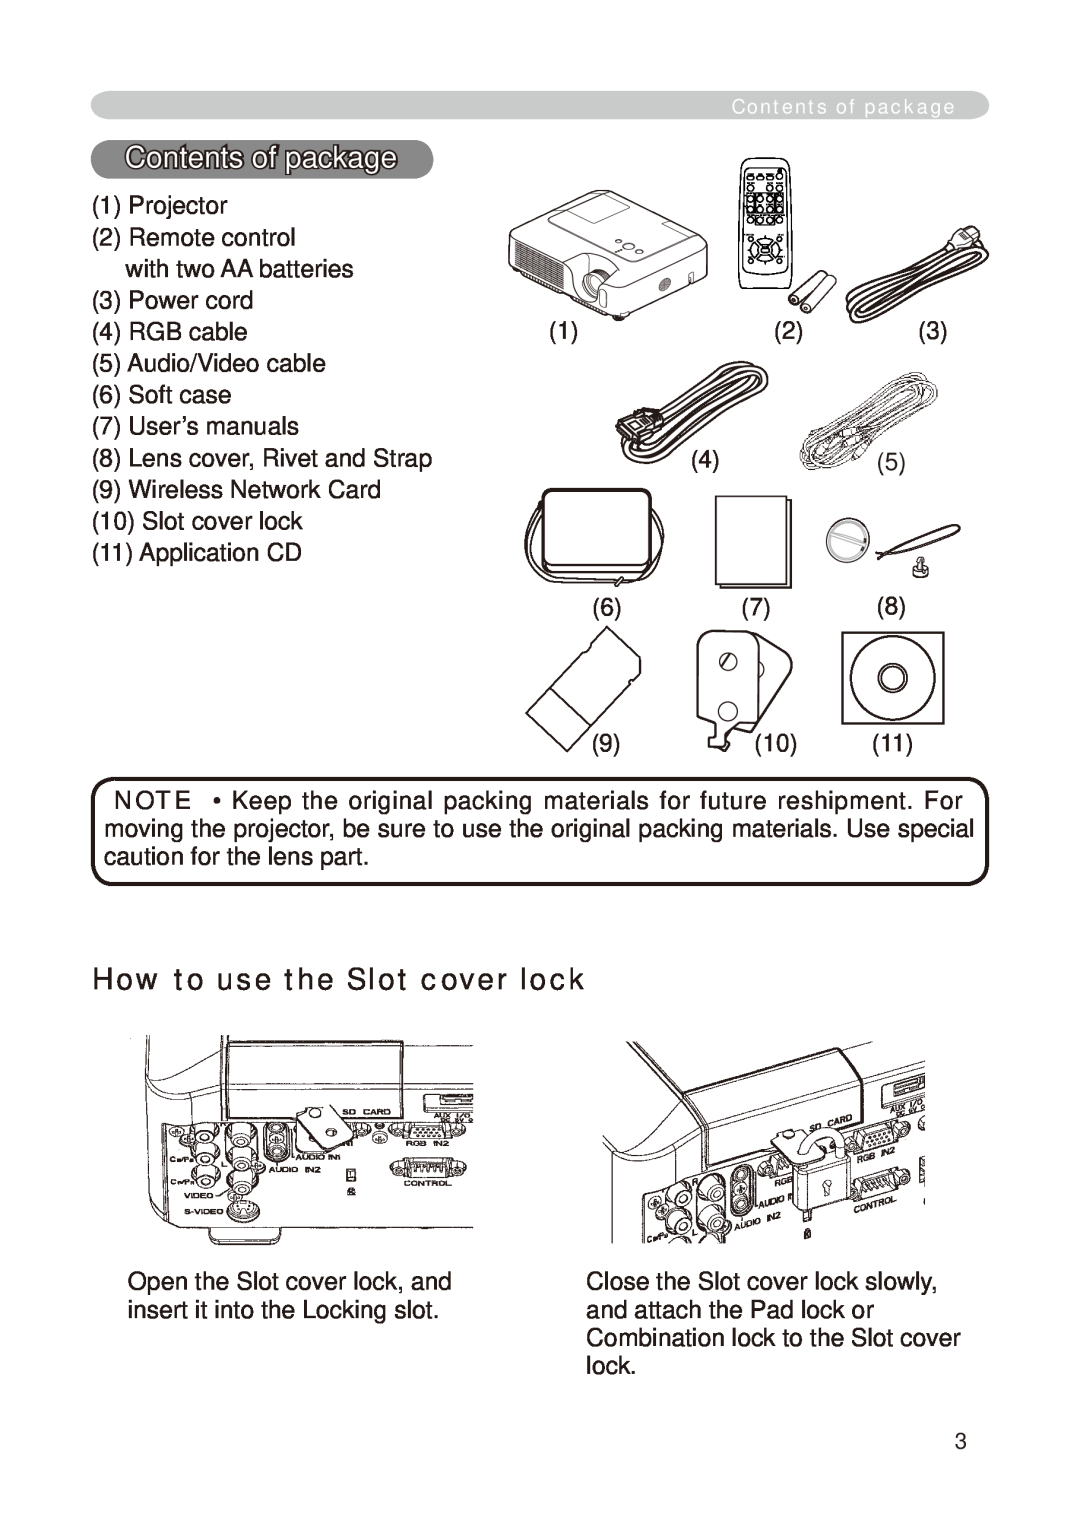 Hitachi CP-X268A user manual Contents of package, How to use the Slot cover lock 